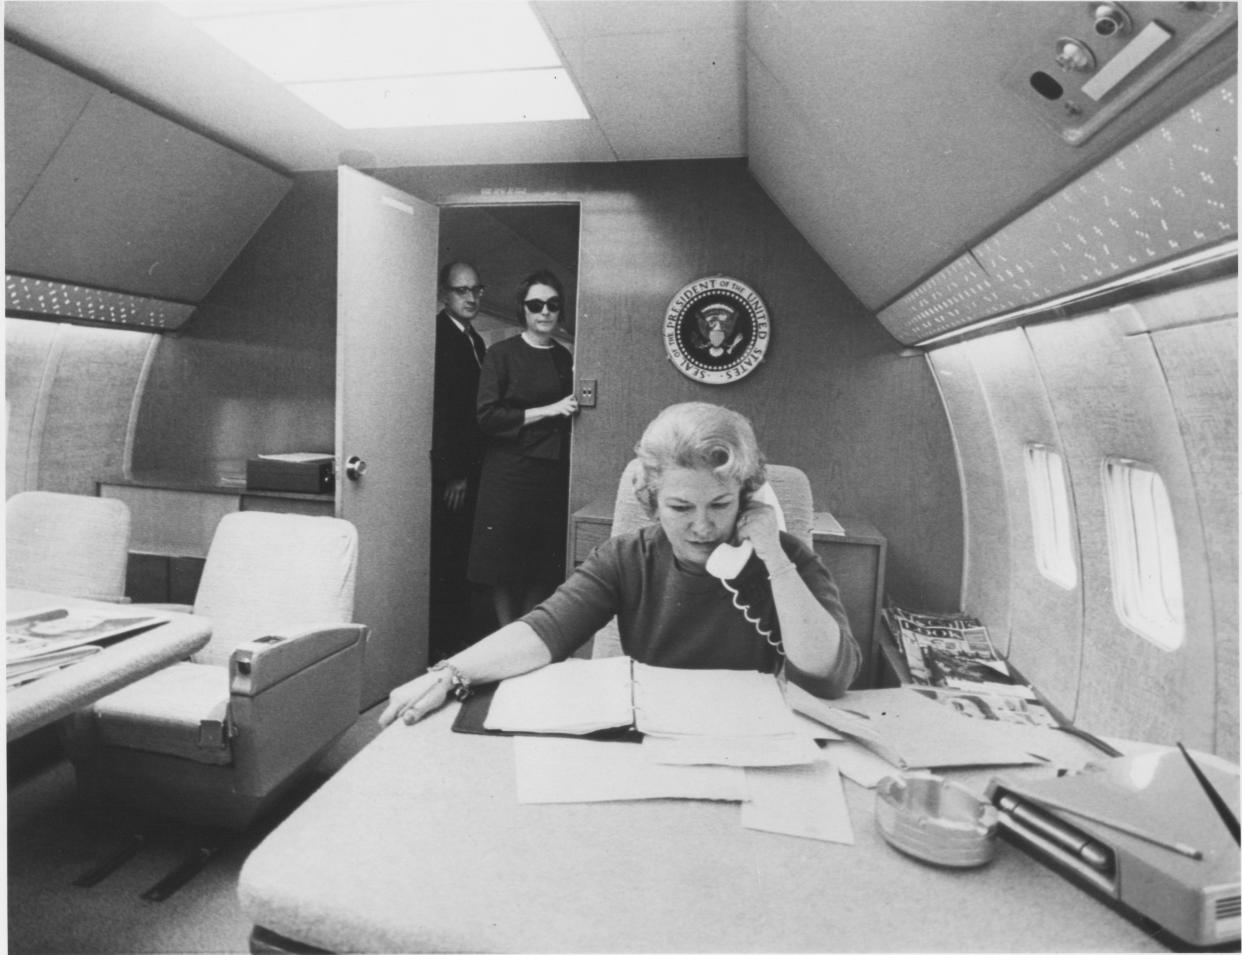 Liz Carpenter in action on Air Force One. The former journalist worked for the Johnsons in Washington D.C. for nine years, most prominently as Lady Bird Johnson's press secretary and chief of staff.